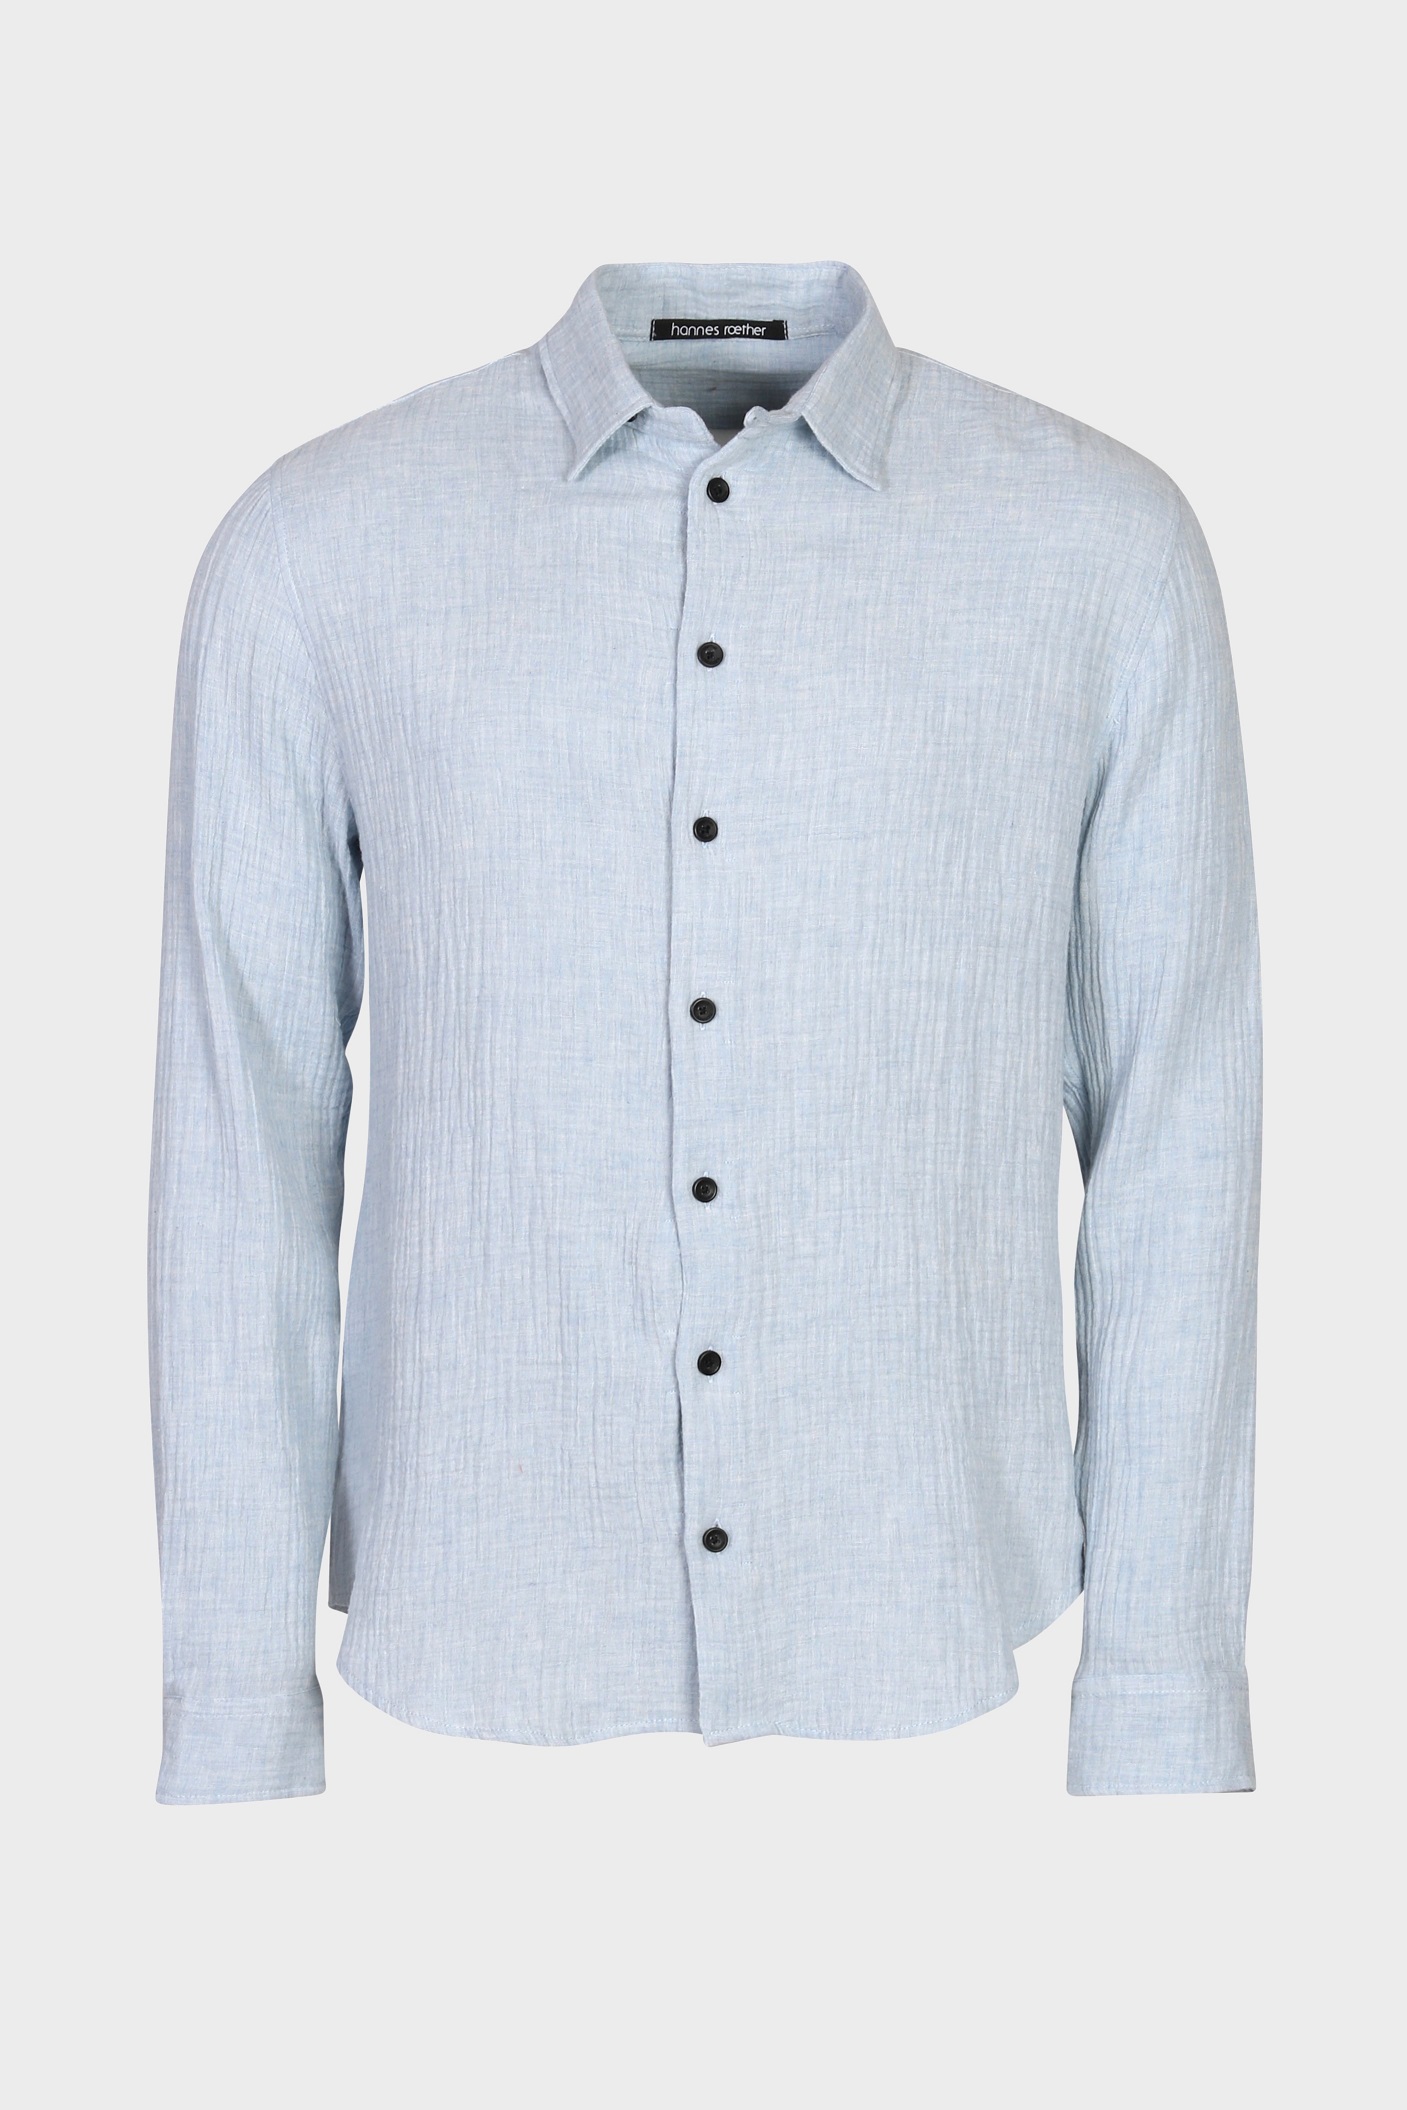 HANNES ROETHER Mousseline Shirt in Light Blue